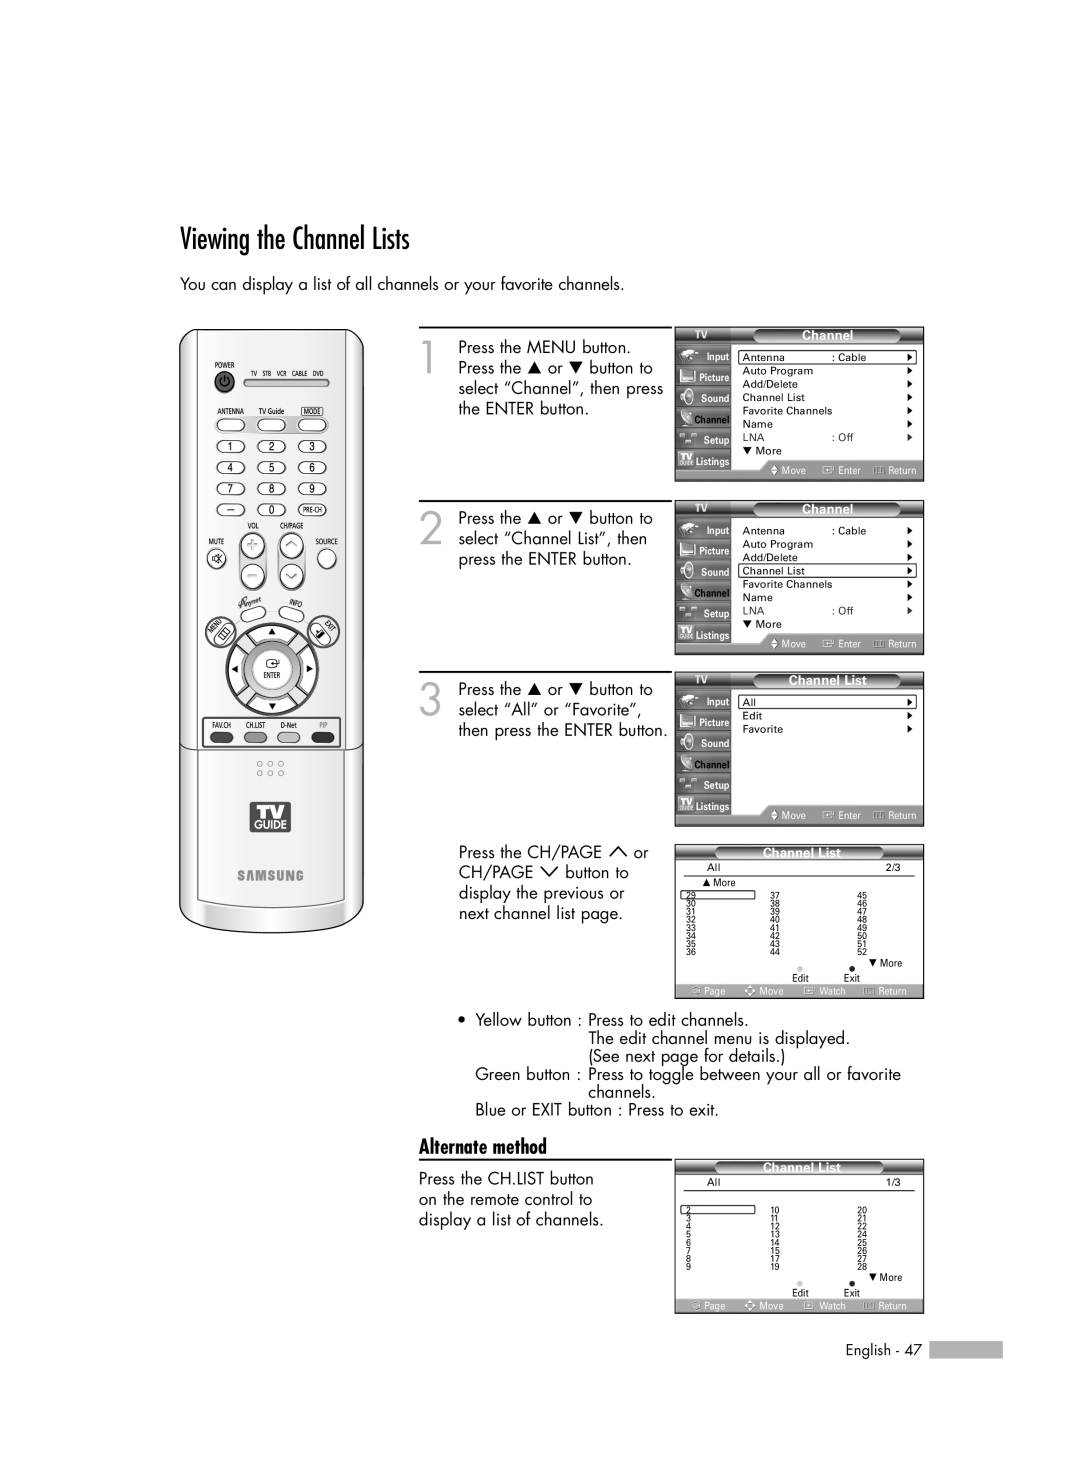 Samsung HL-R5688W manual Viewing the Channel Lists, Alternate method 